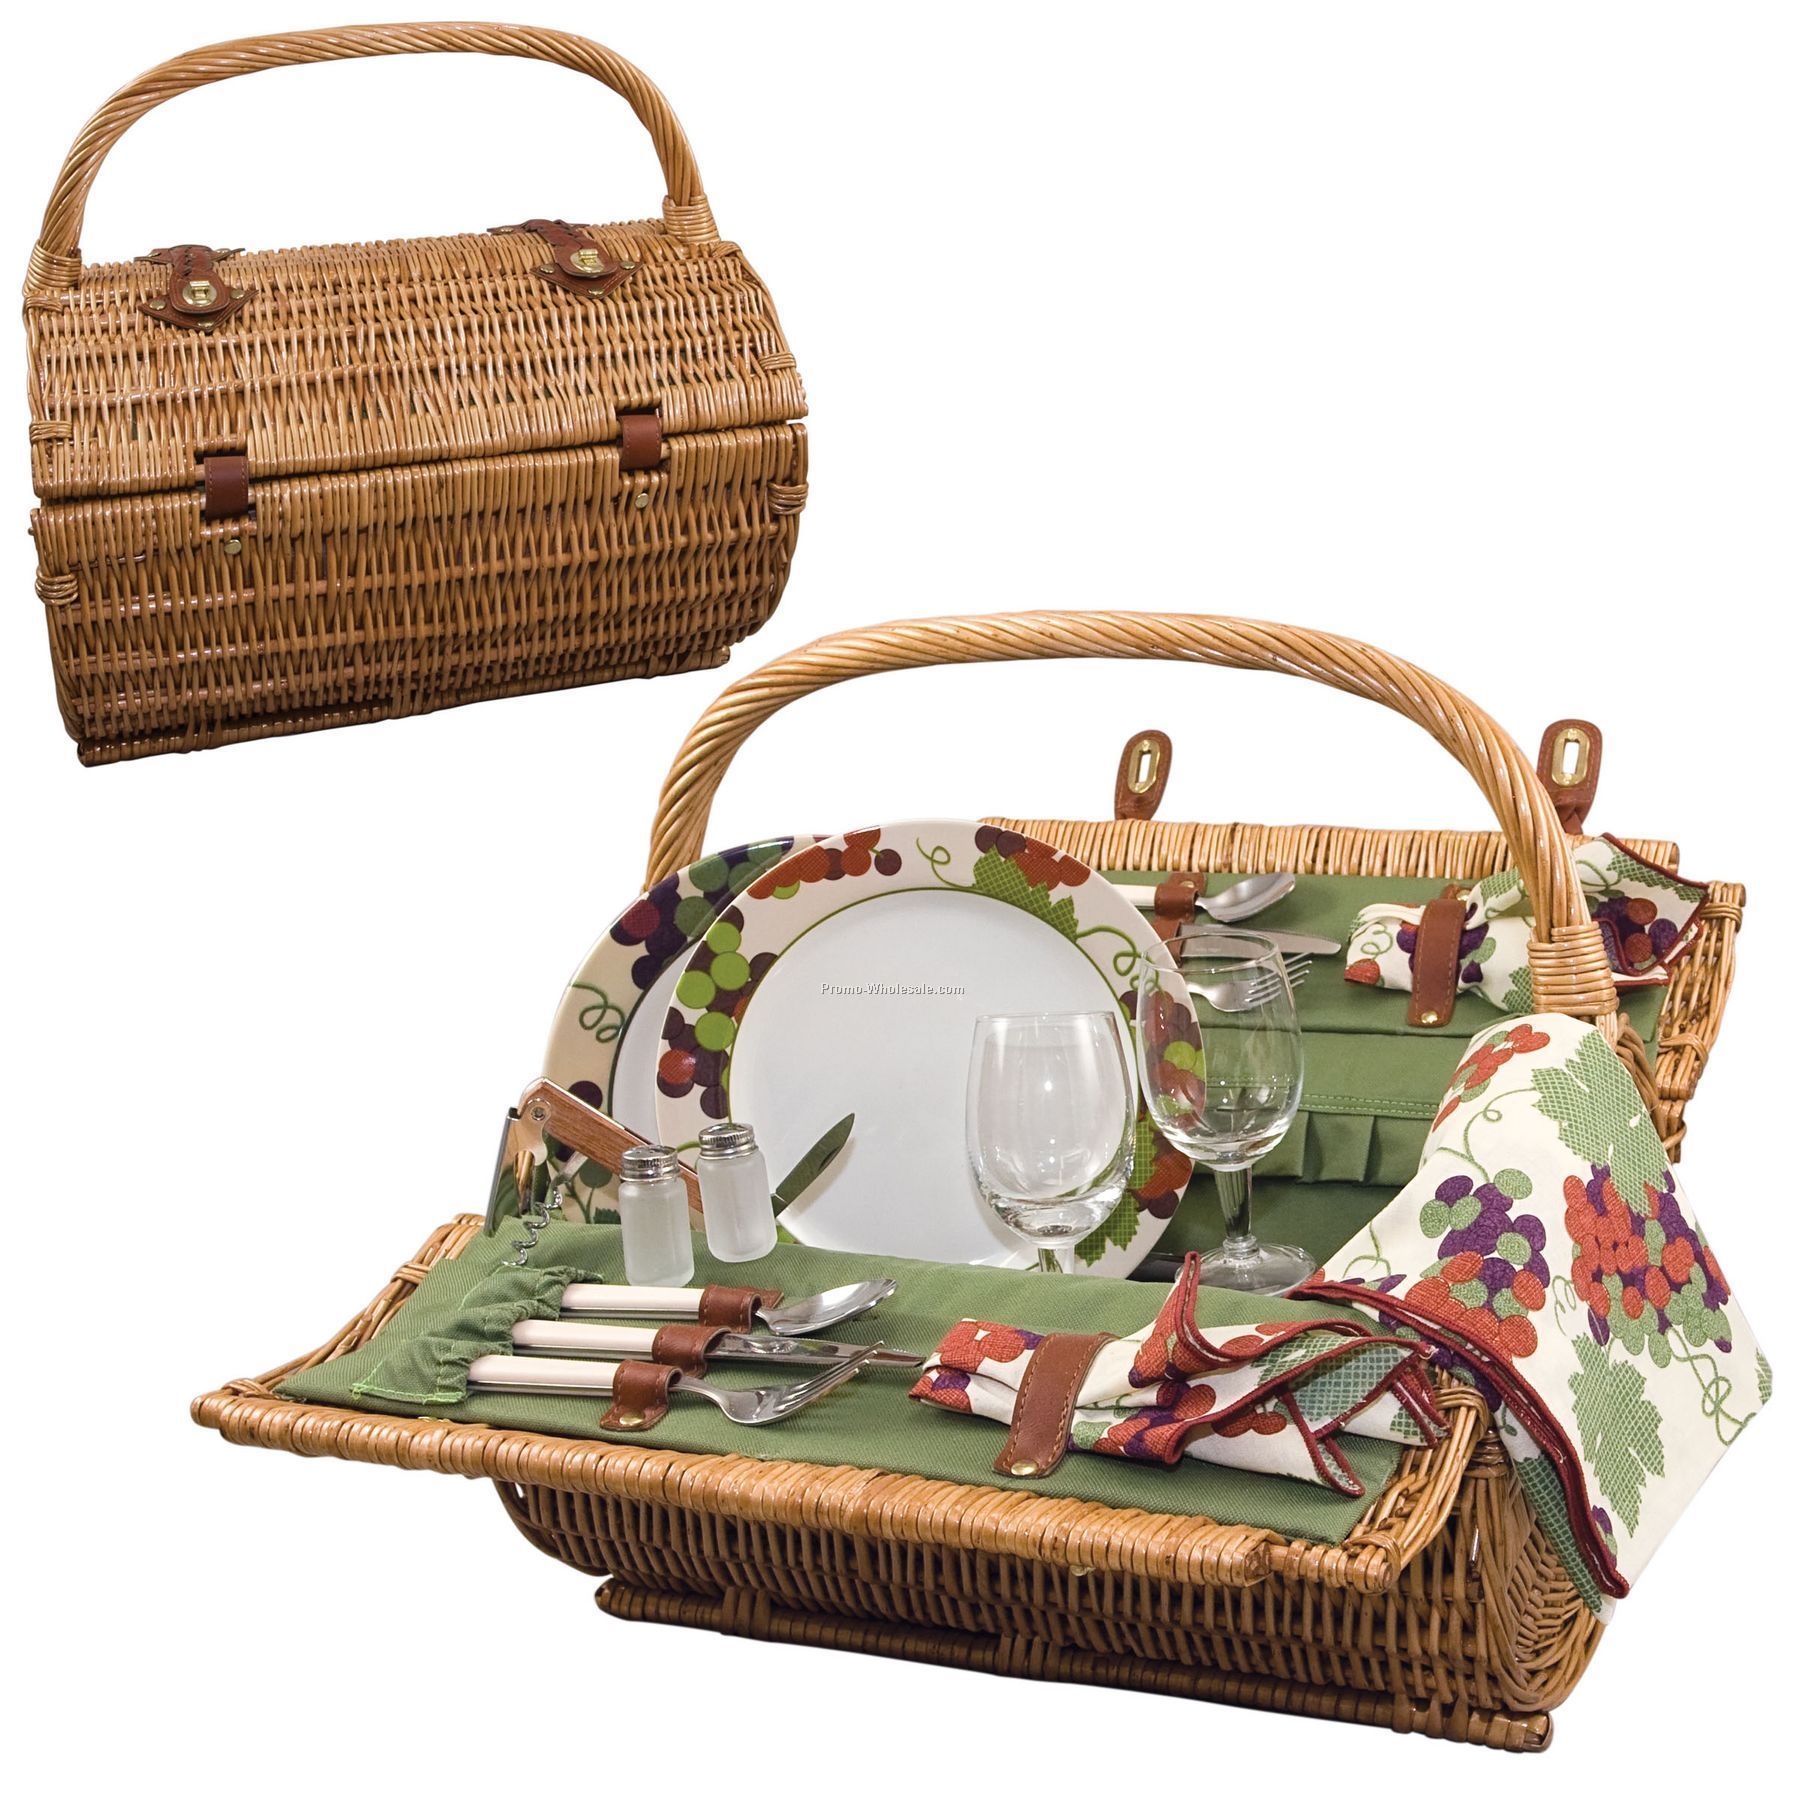 Barrel Uniquely Shaped Picnic Basket With Service For 2